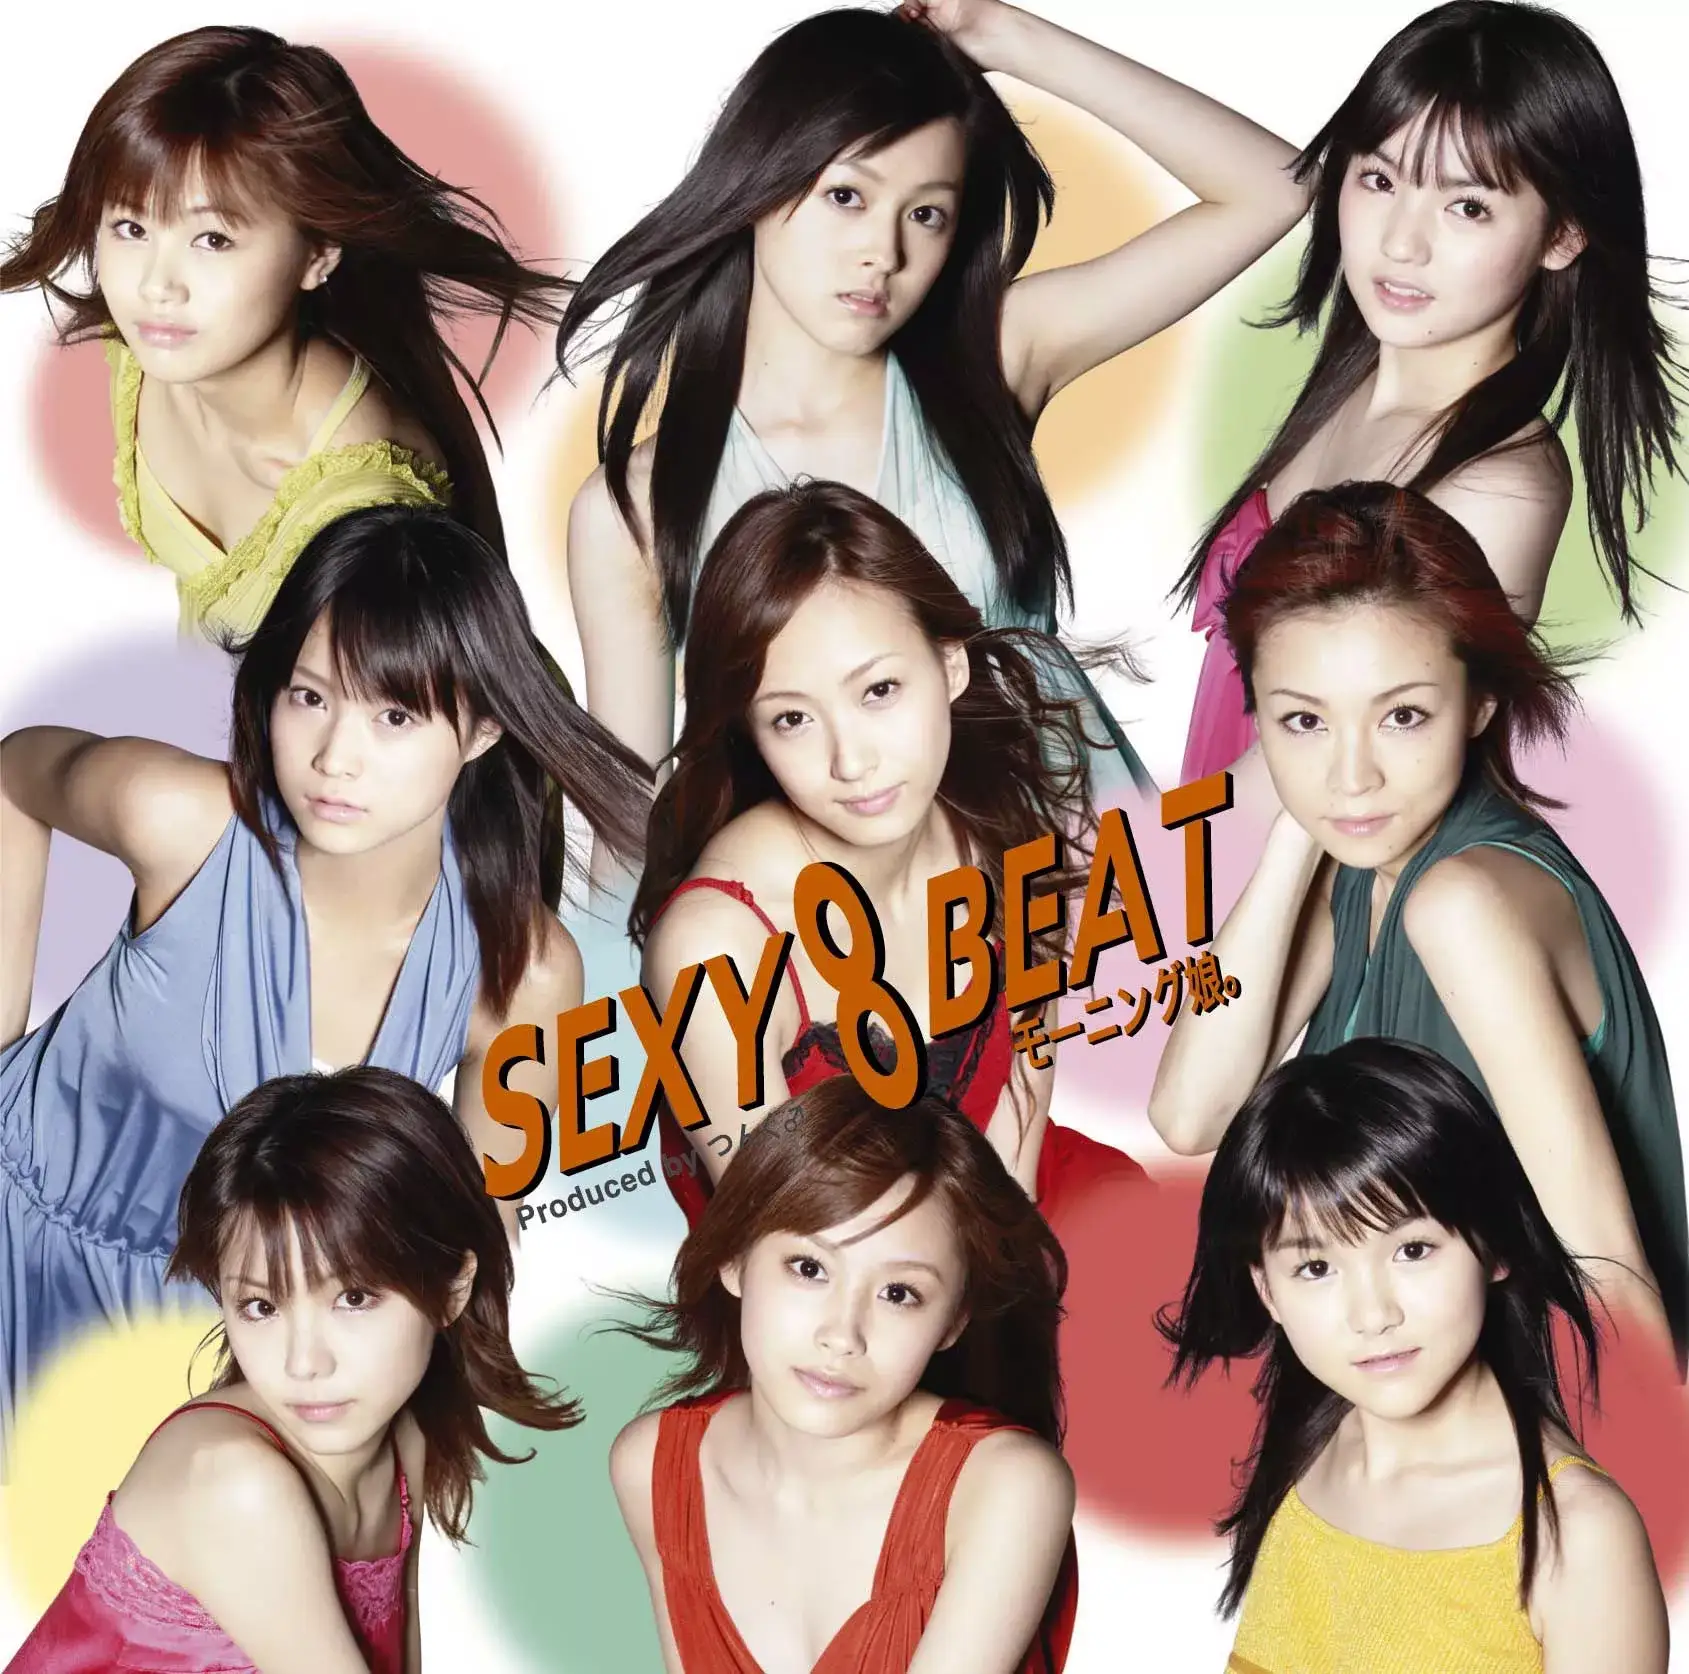 Morning Musume SEXY 8 BEAT cover artwork